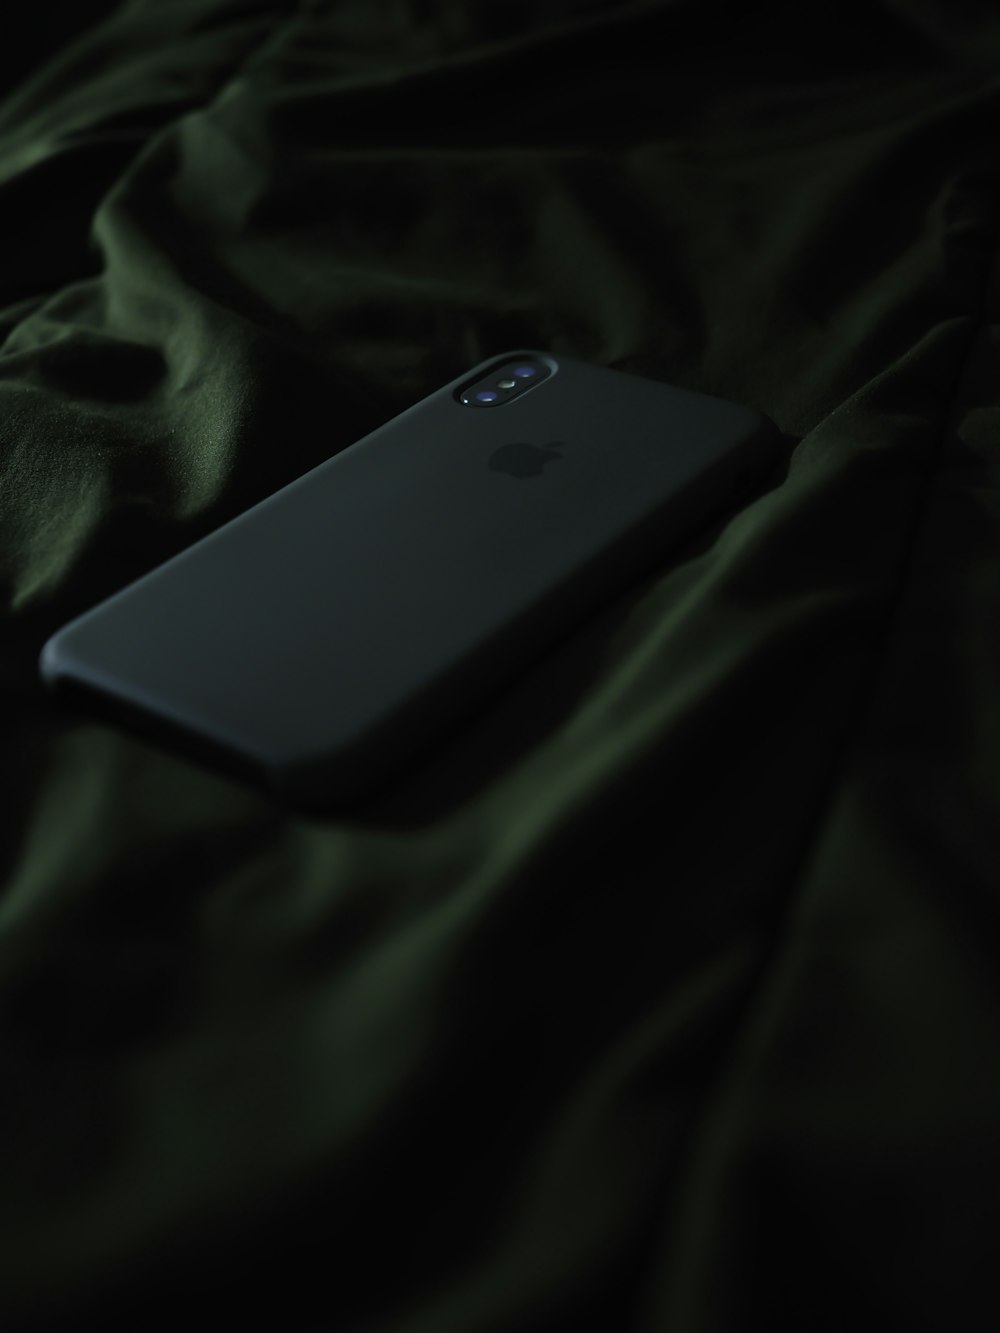 space gray iPhone X with gray case